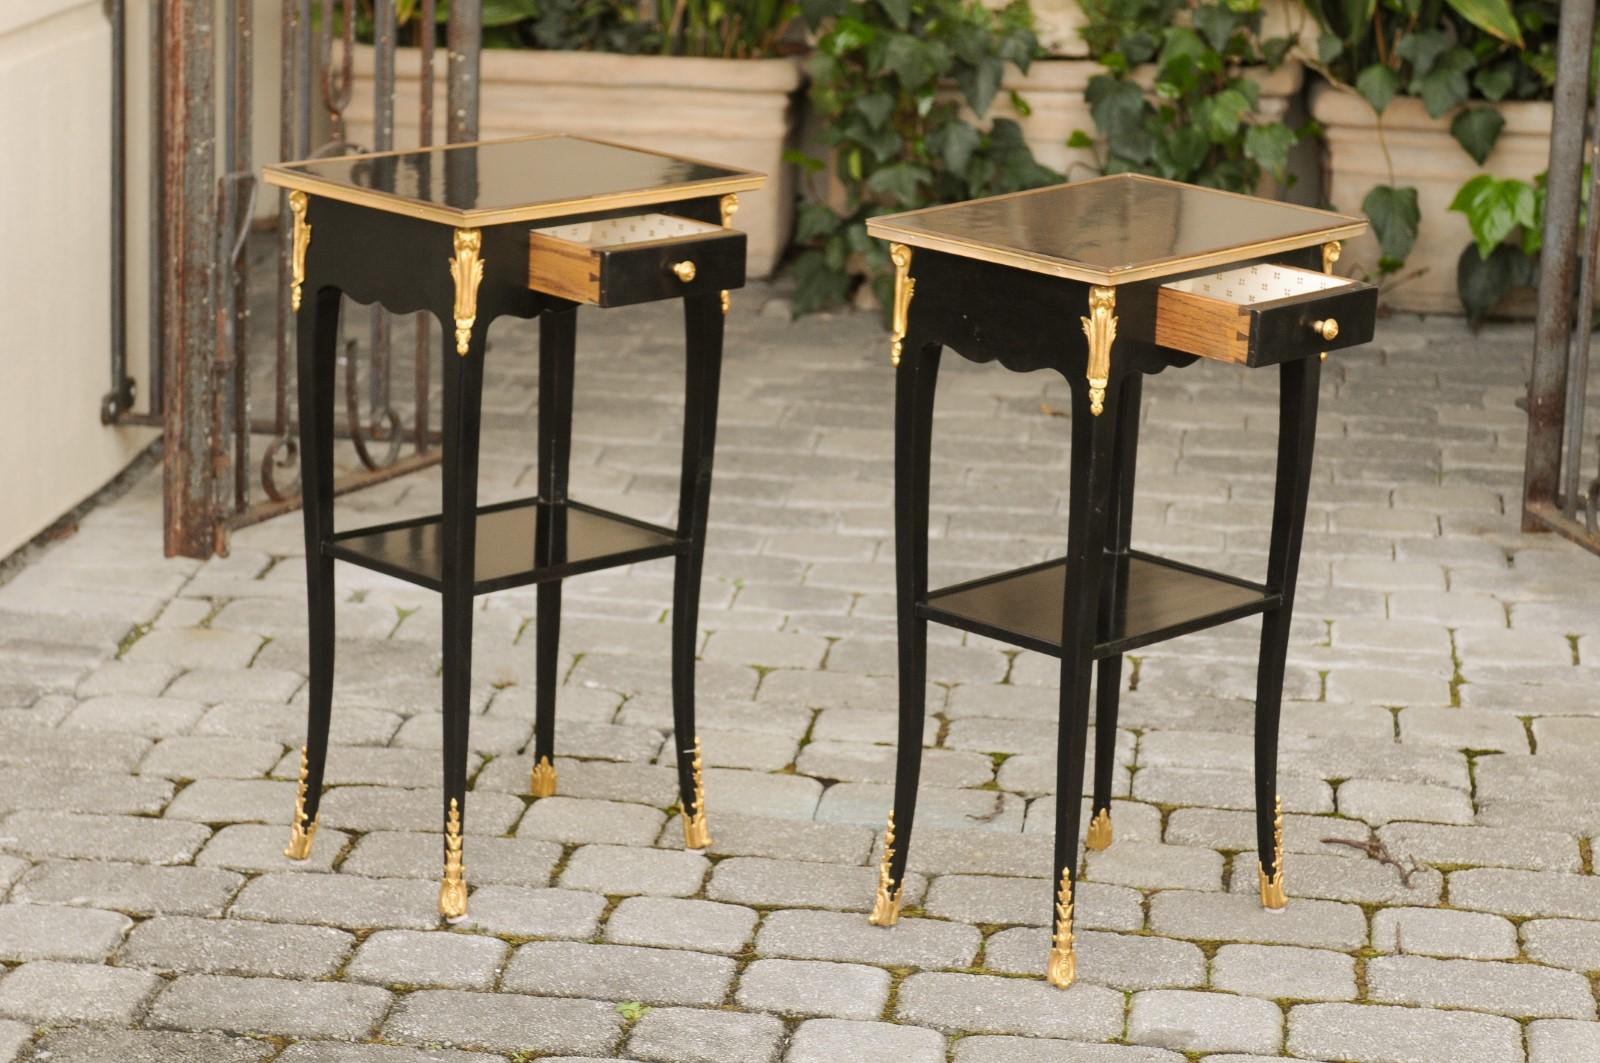 Pair of French Midcentury Ebonized Tables with Ormolu Mounts, Drawer and Shelf For Sale 5